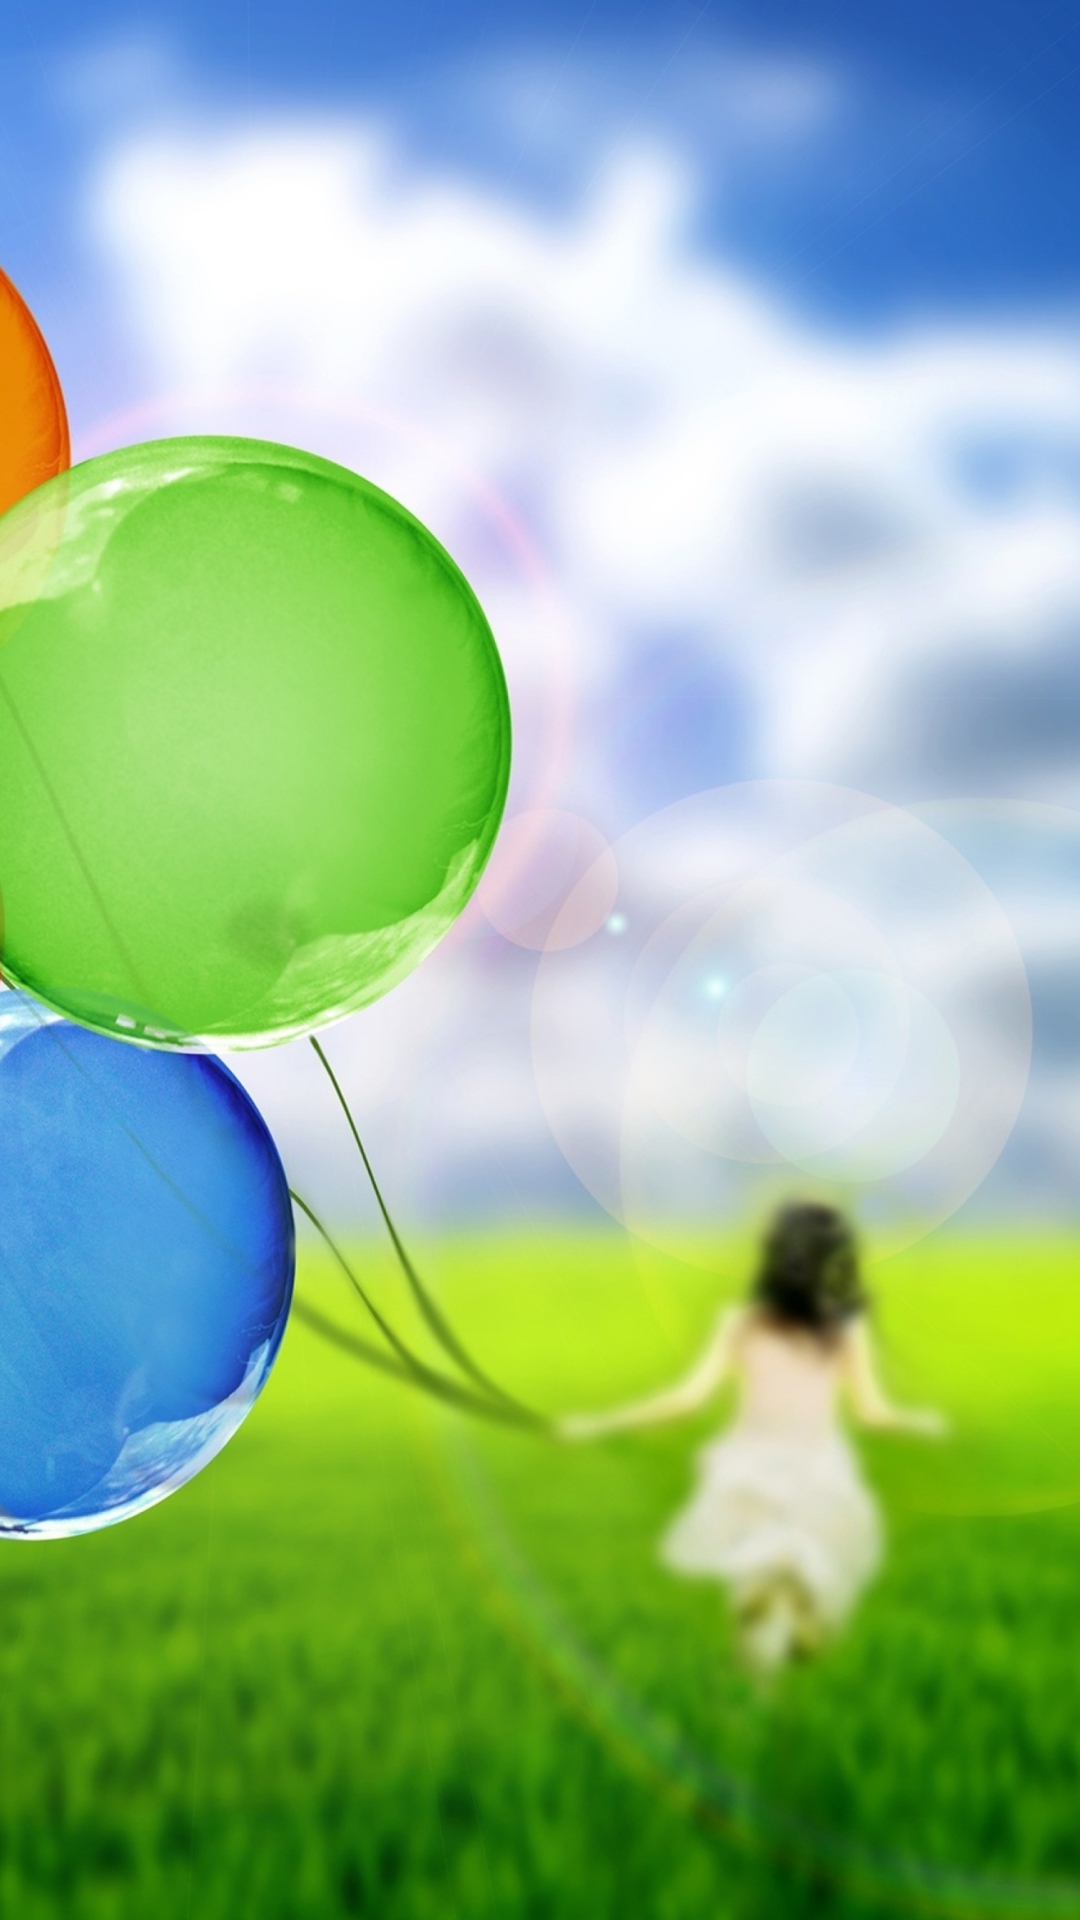 Girl Running With Colorful Balloons wallpaper 1080x1920